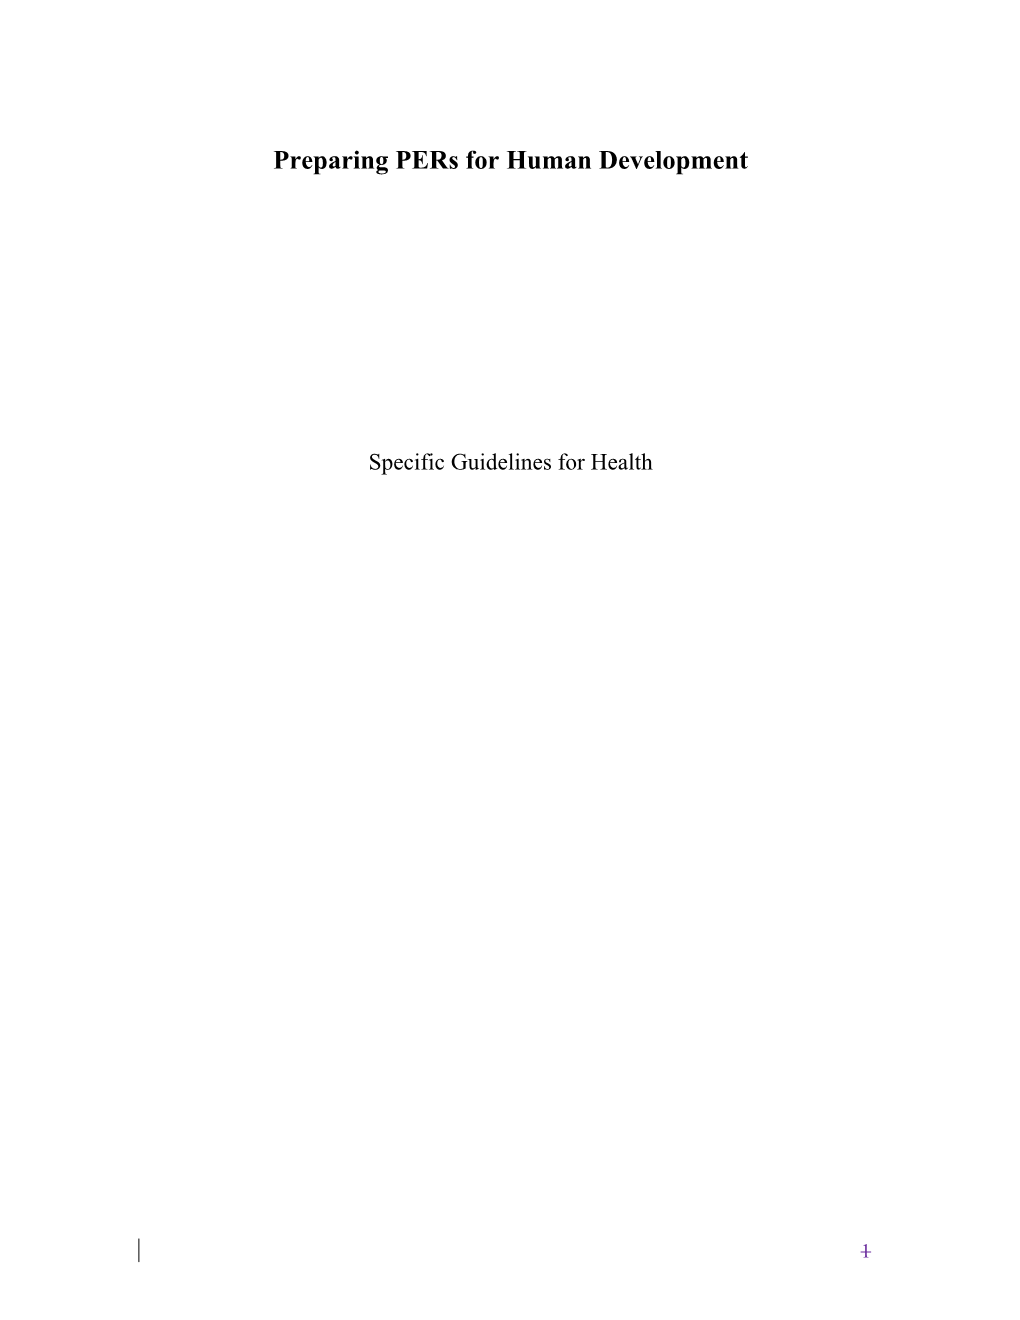 Public Revenues and Expenditure Review (PRER)